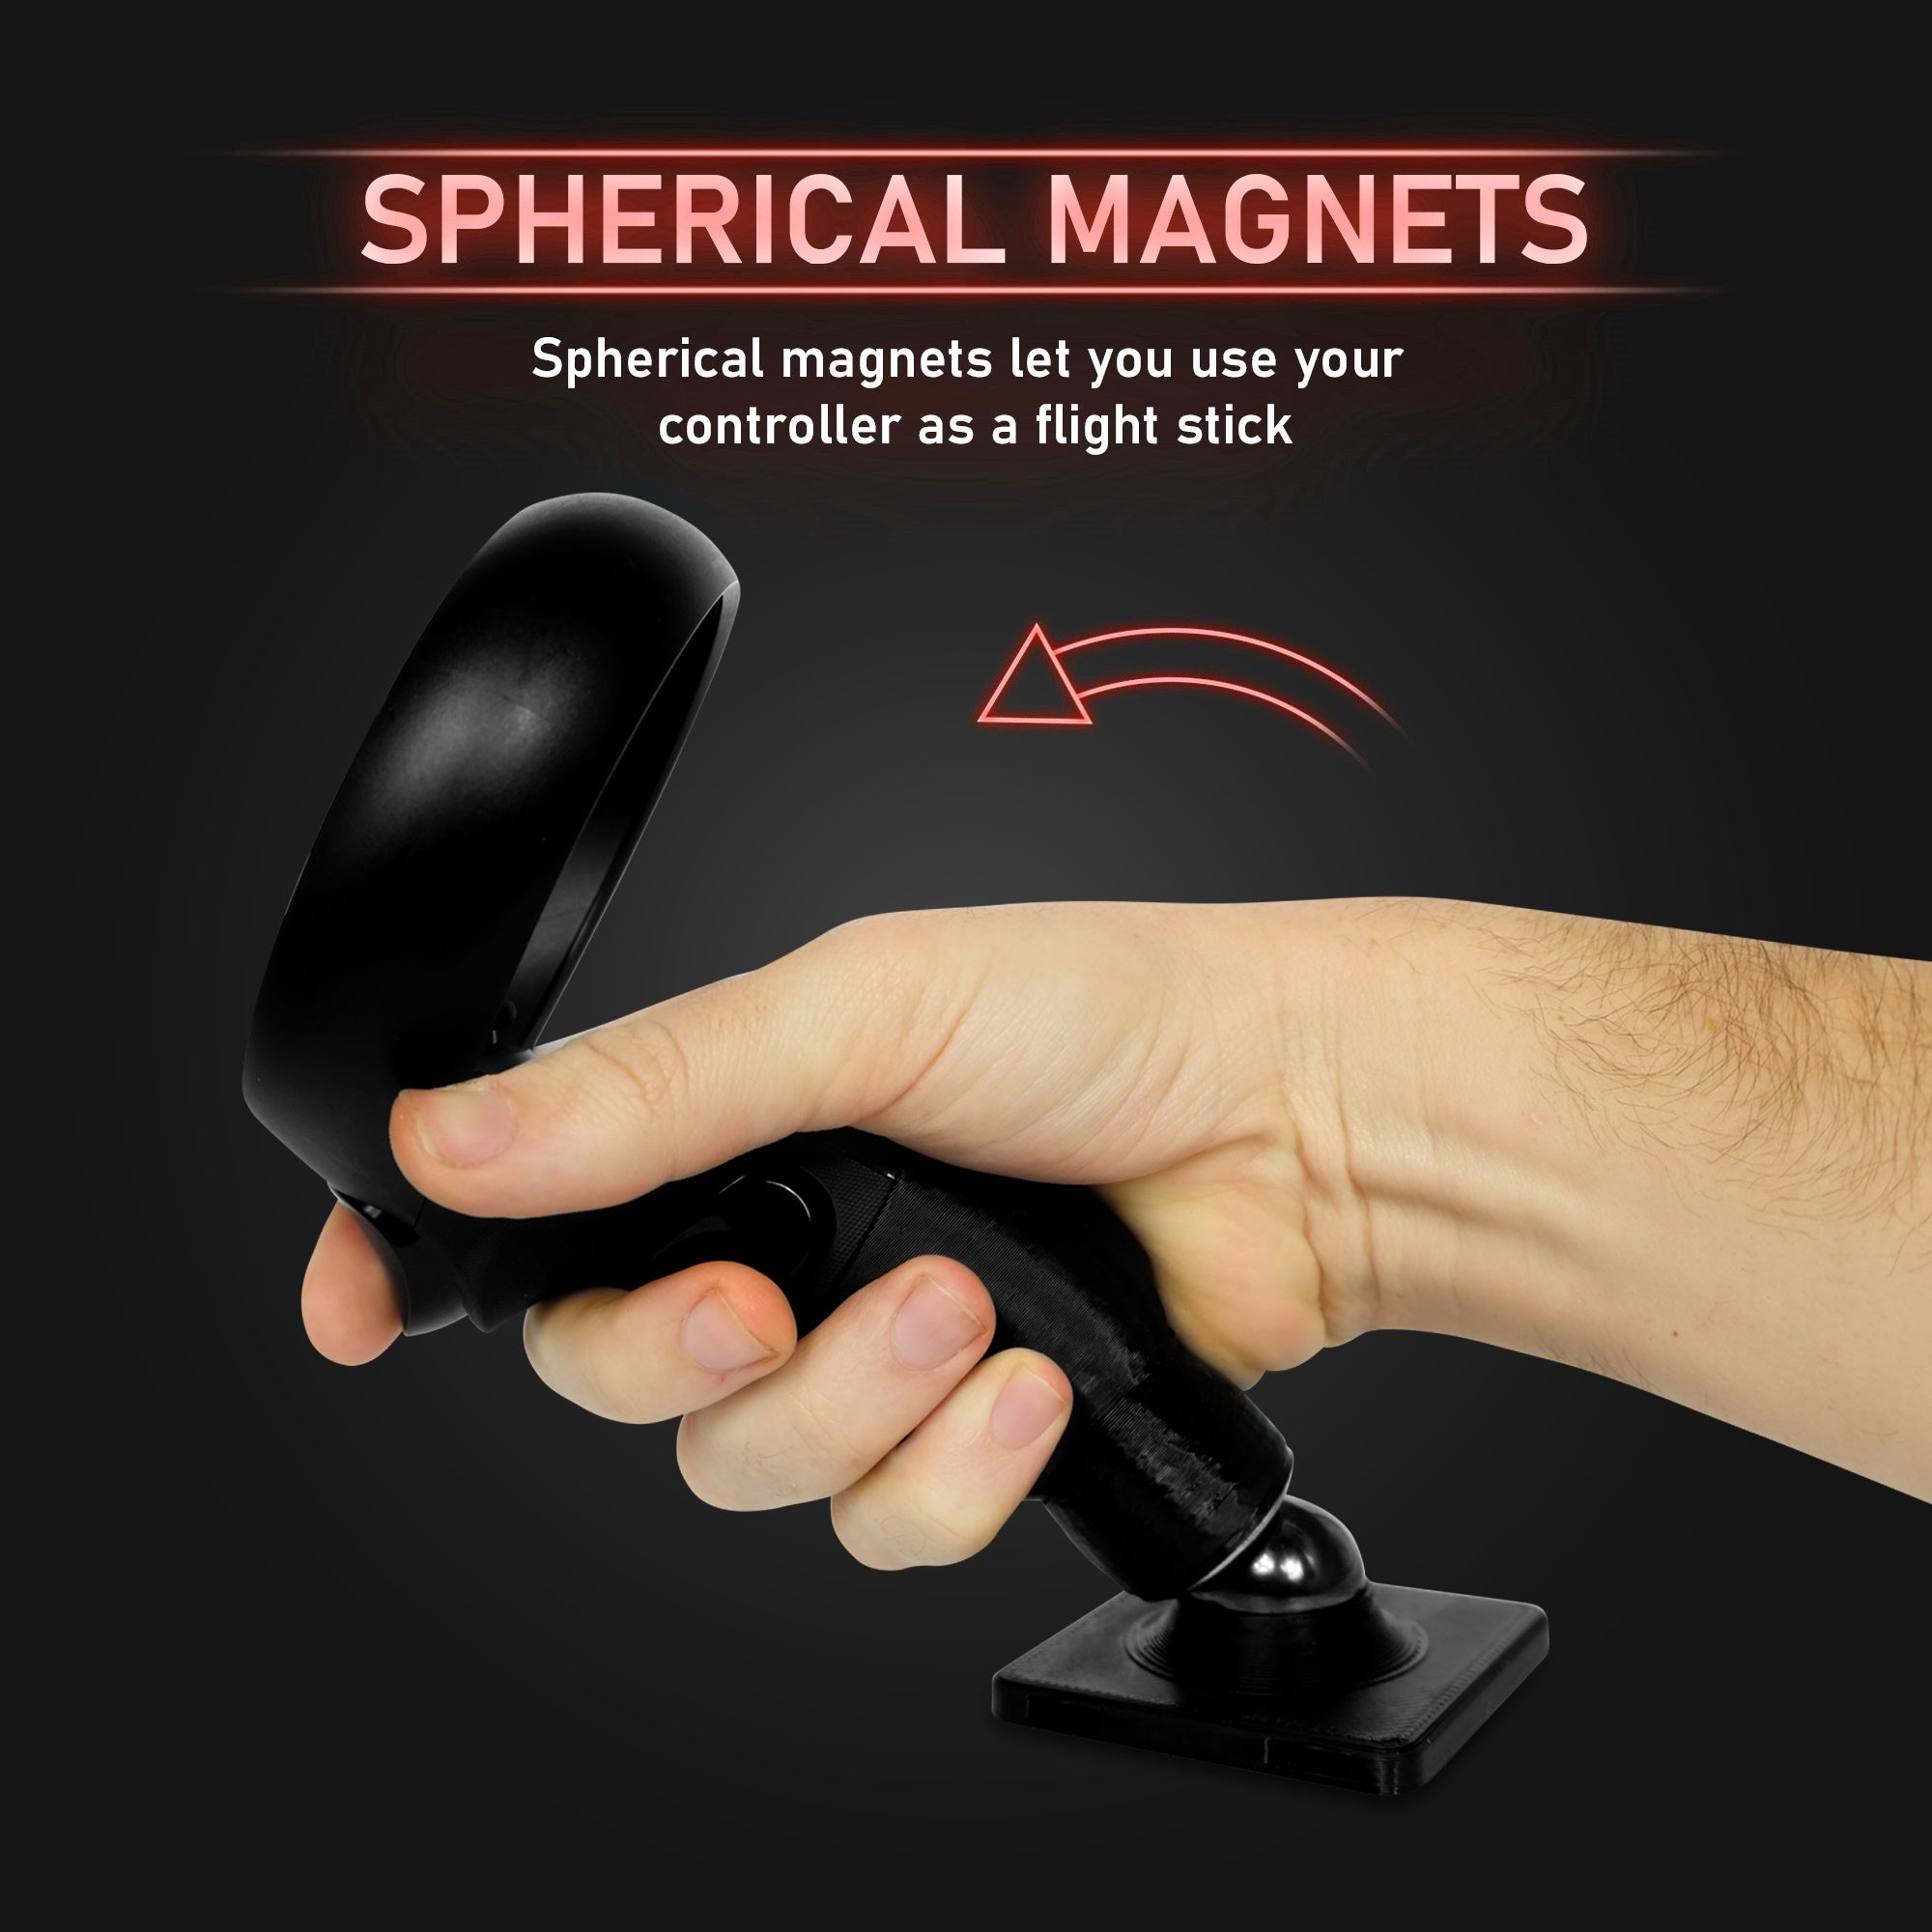 Spherical Magnet. Spherical magnets let you use your controller as a flight stick